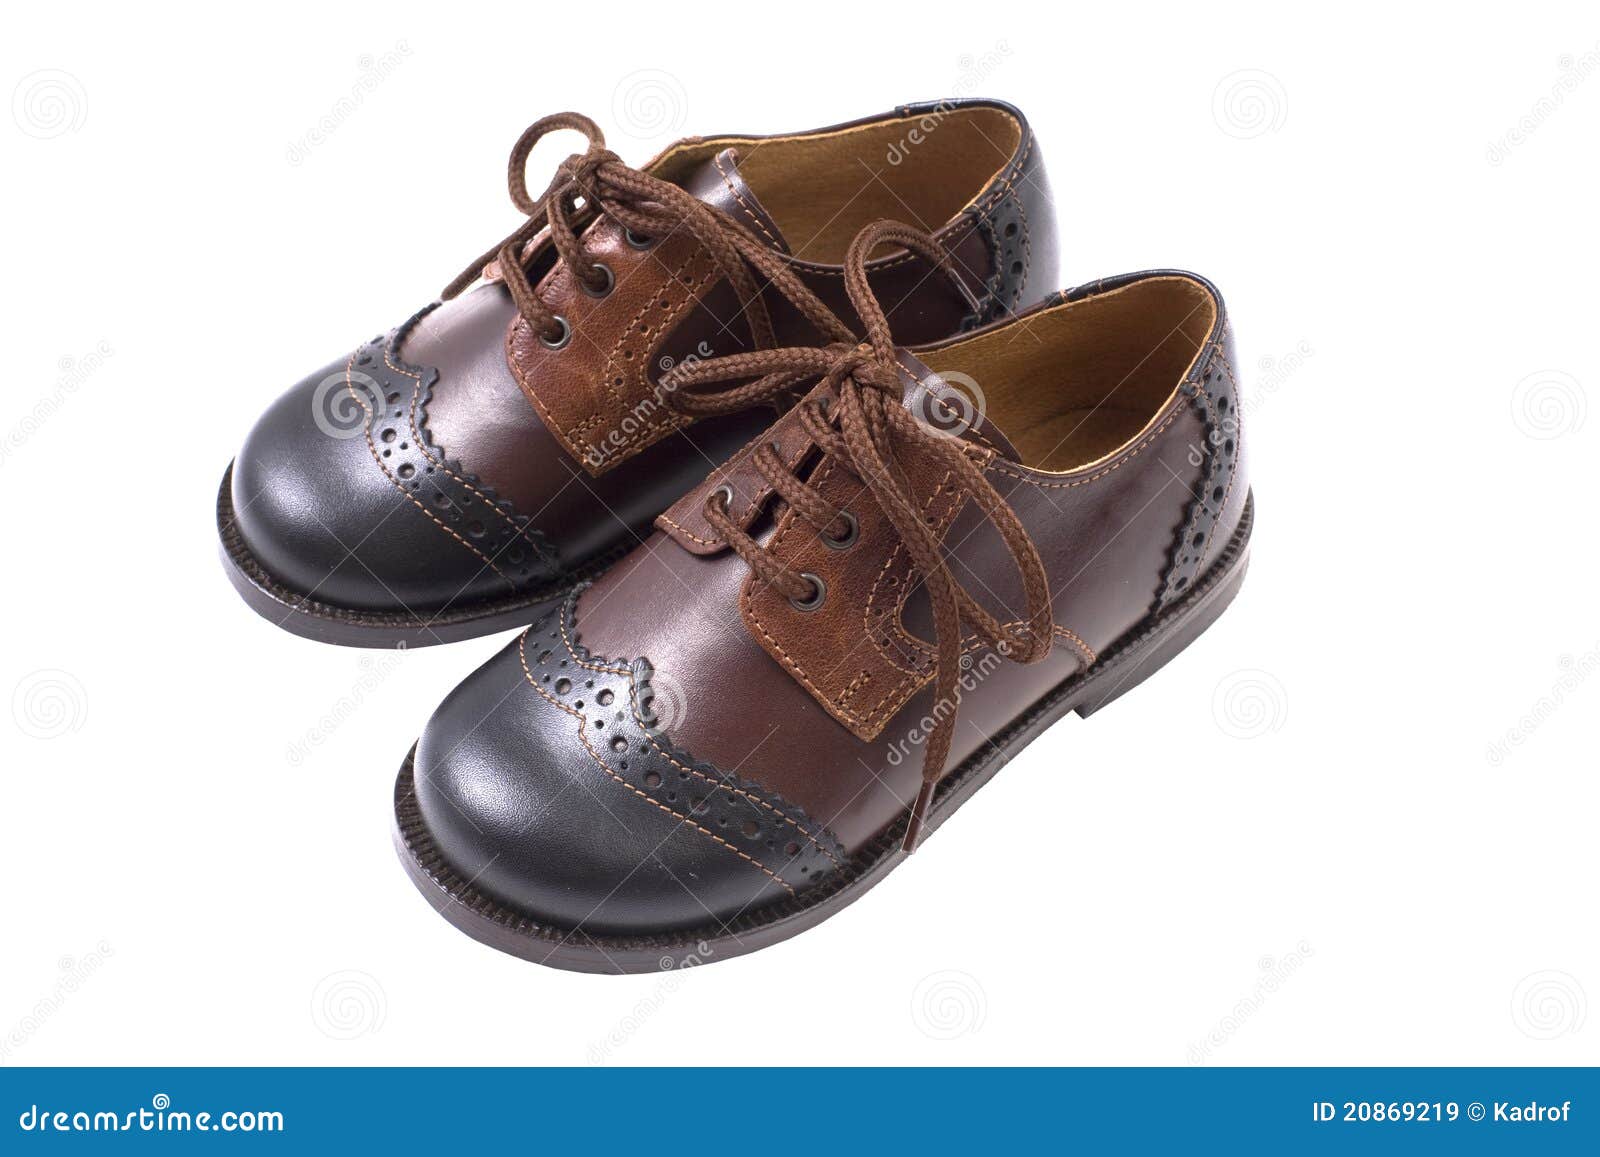 Kids Summer Leather Brown Shoes Isolated On White Royalty Free Stock ...